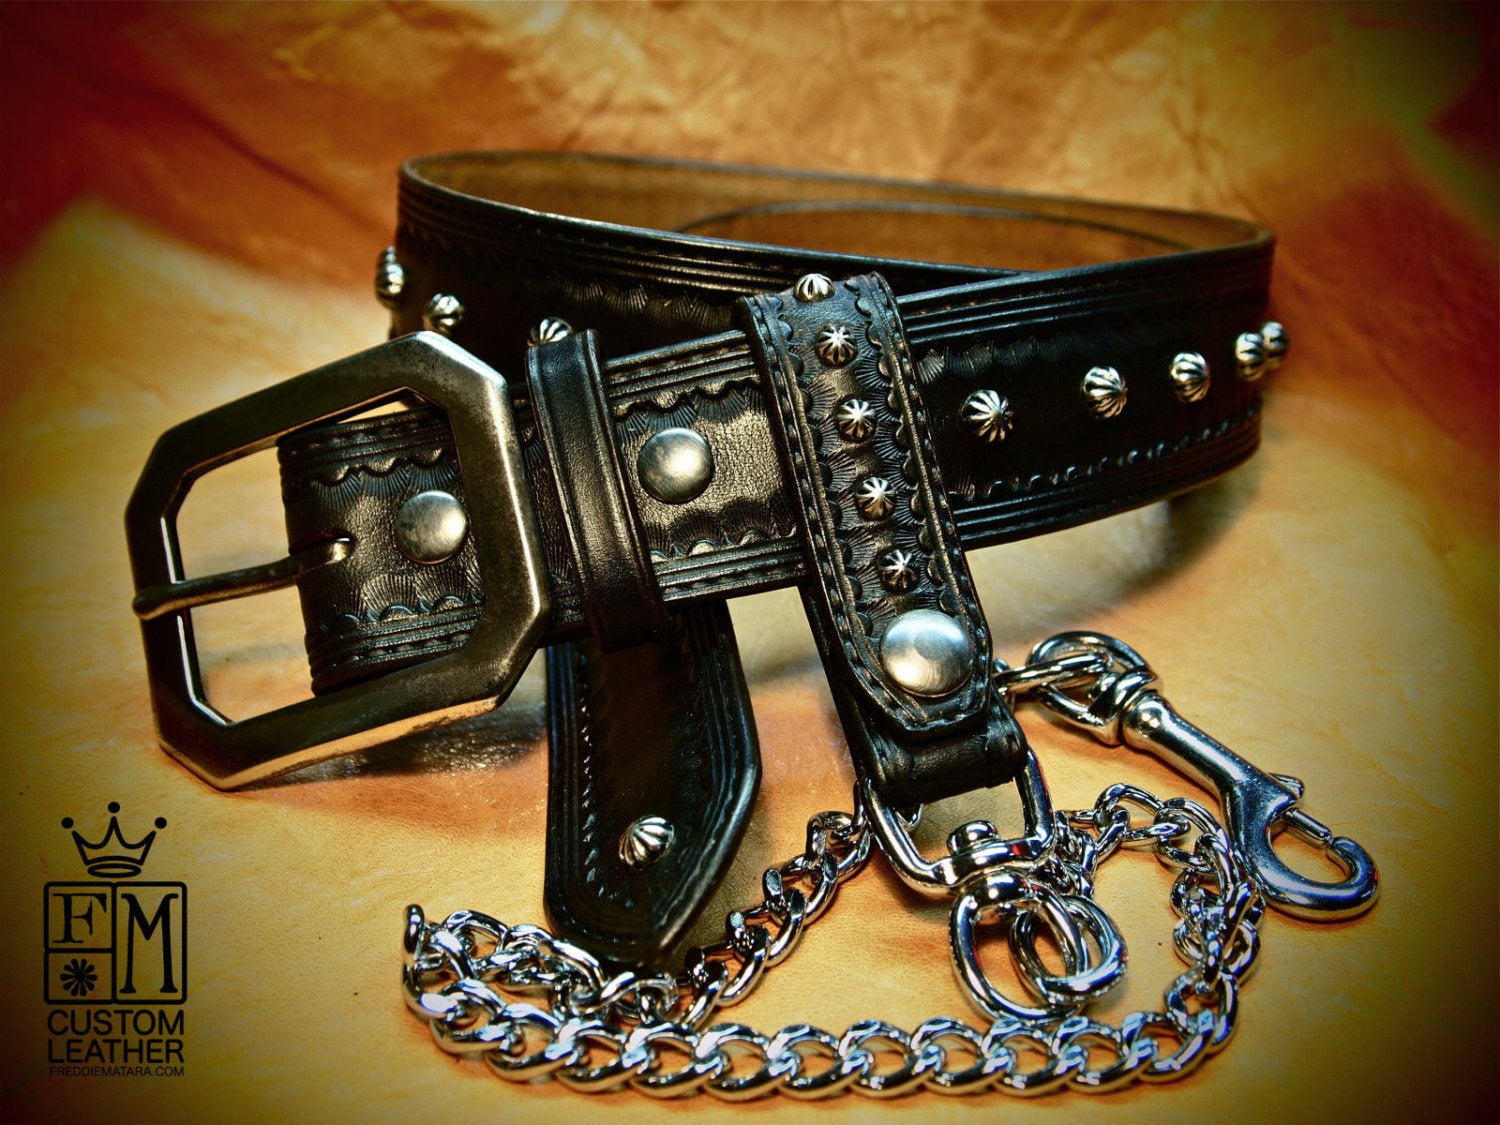 black belt with chain